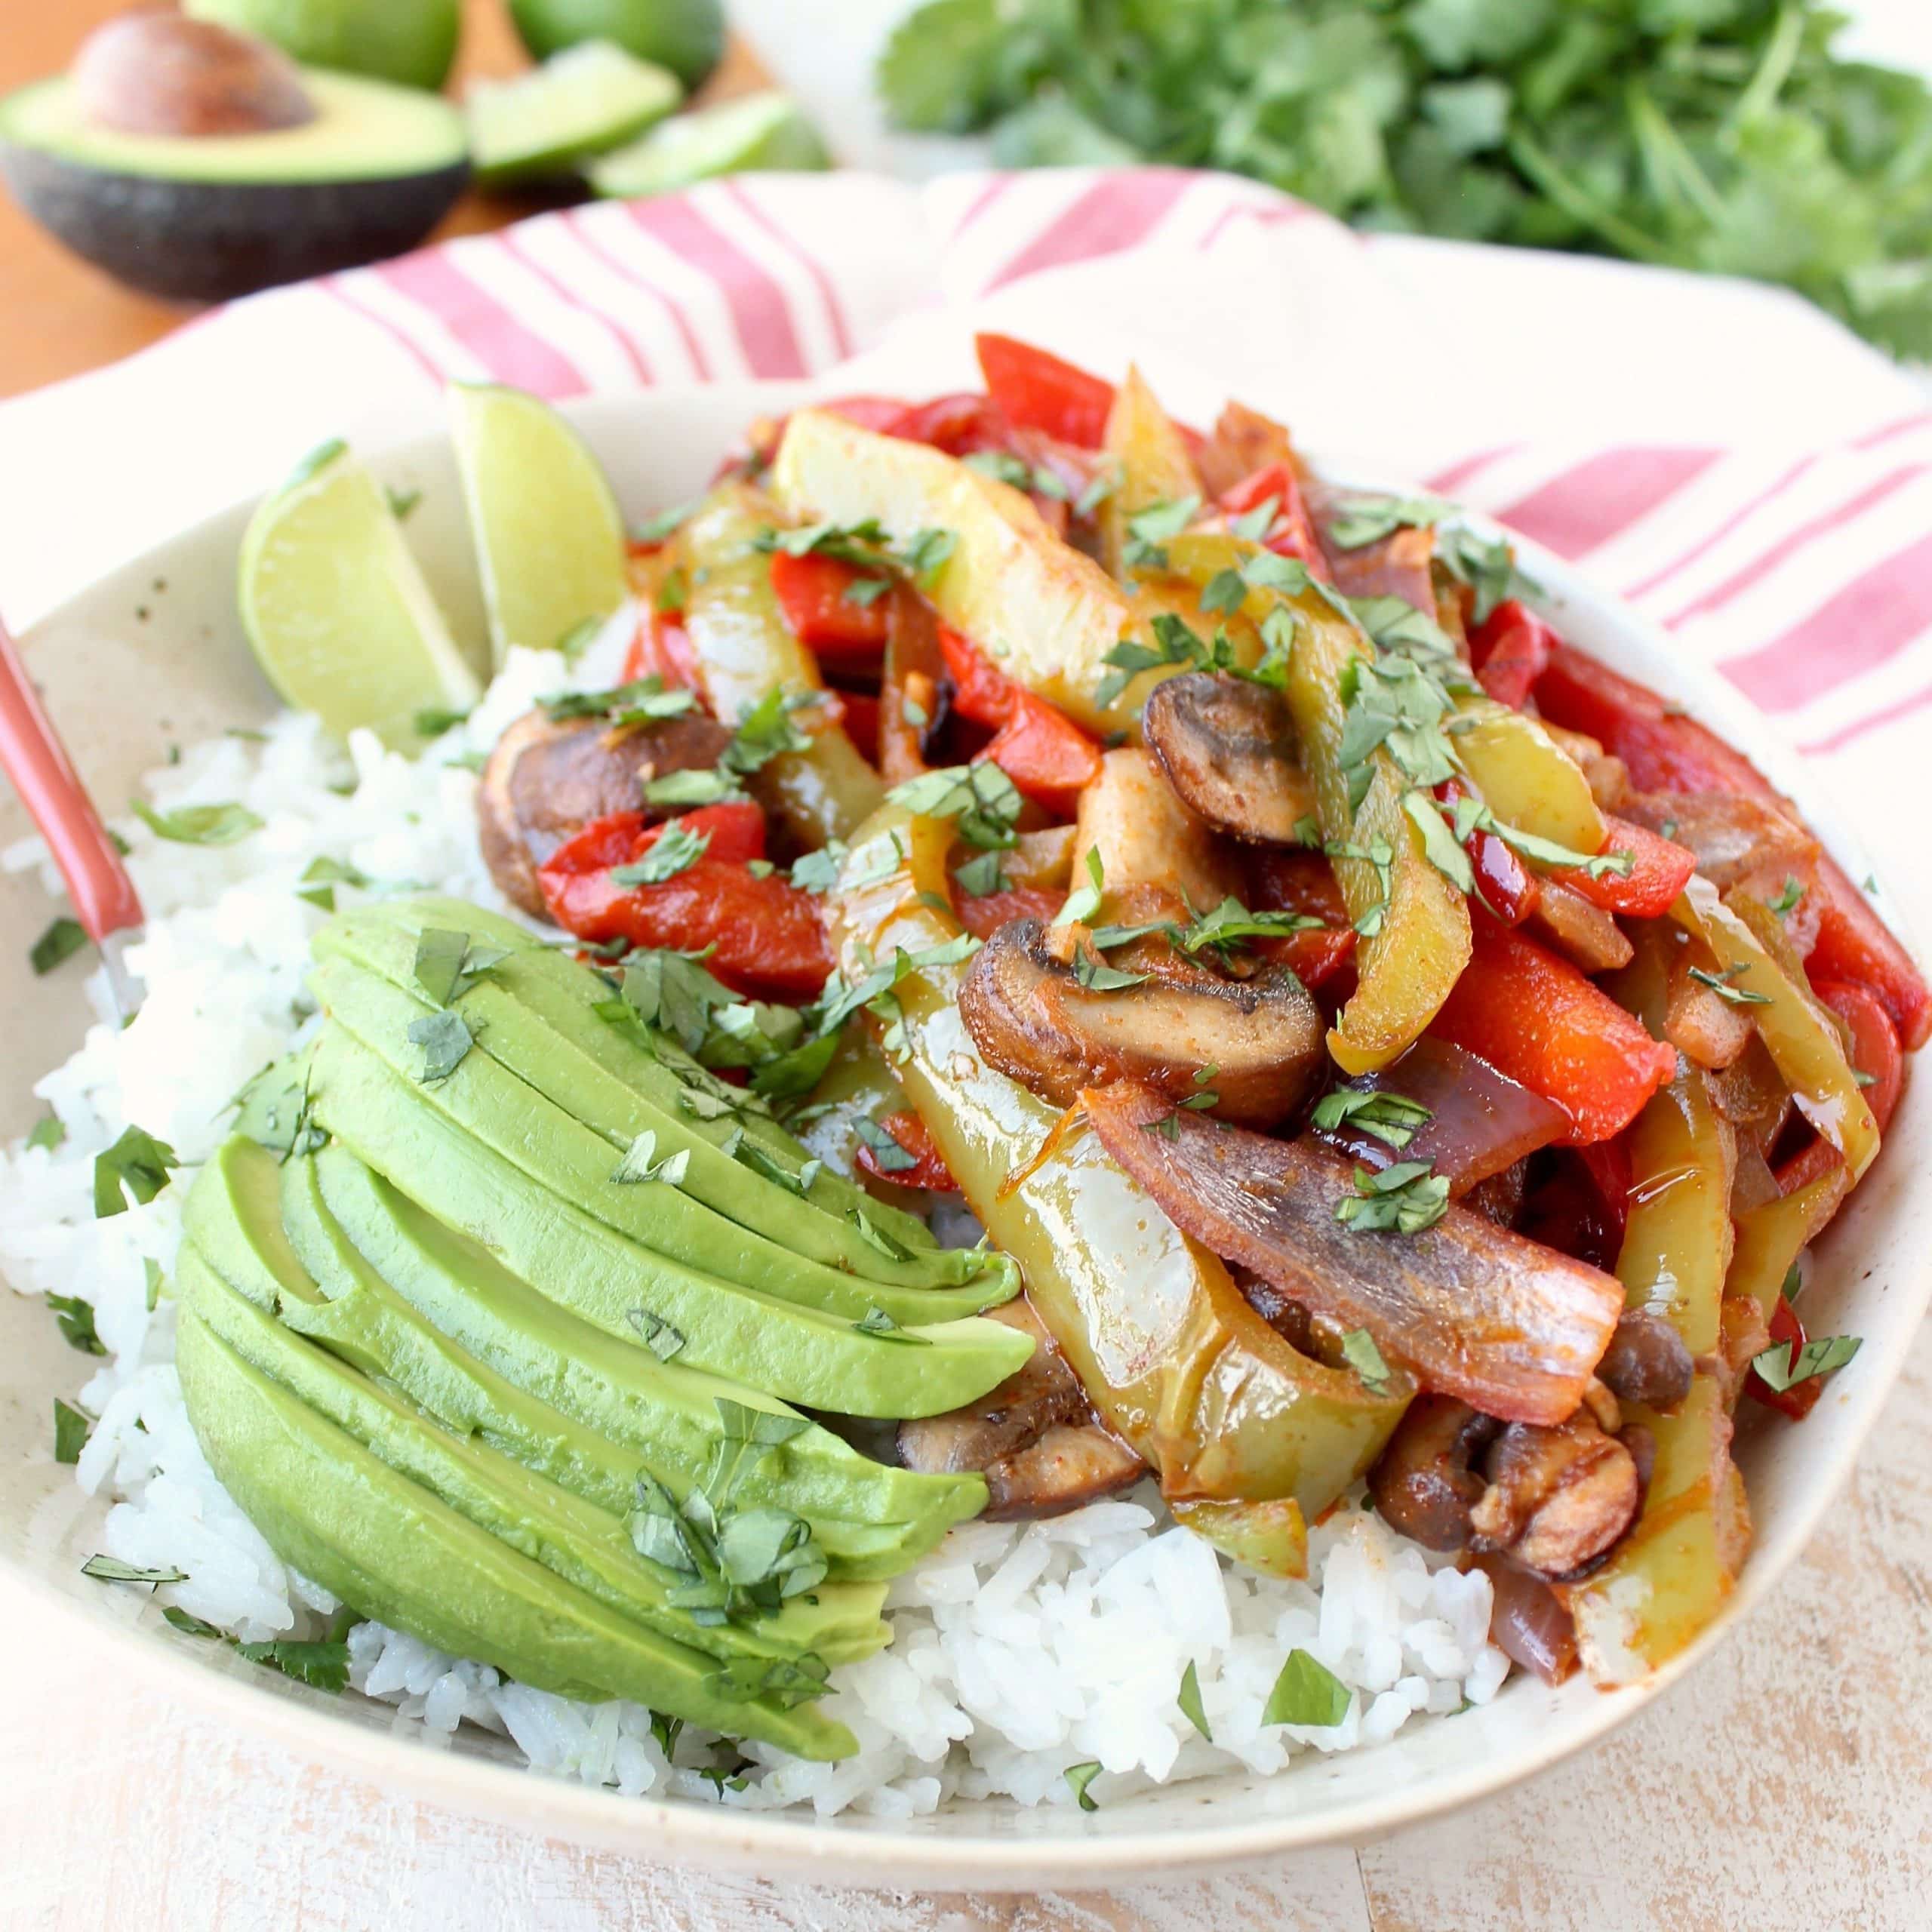 Sautéed, seasoned veggies are served on top of cilantro lime rice with ...